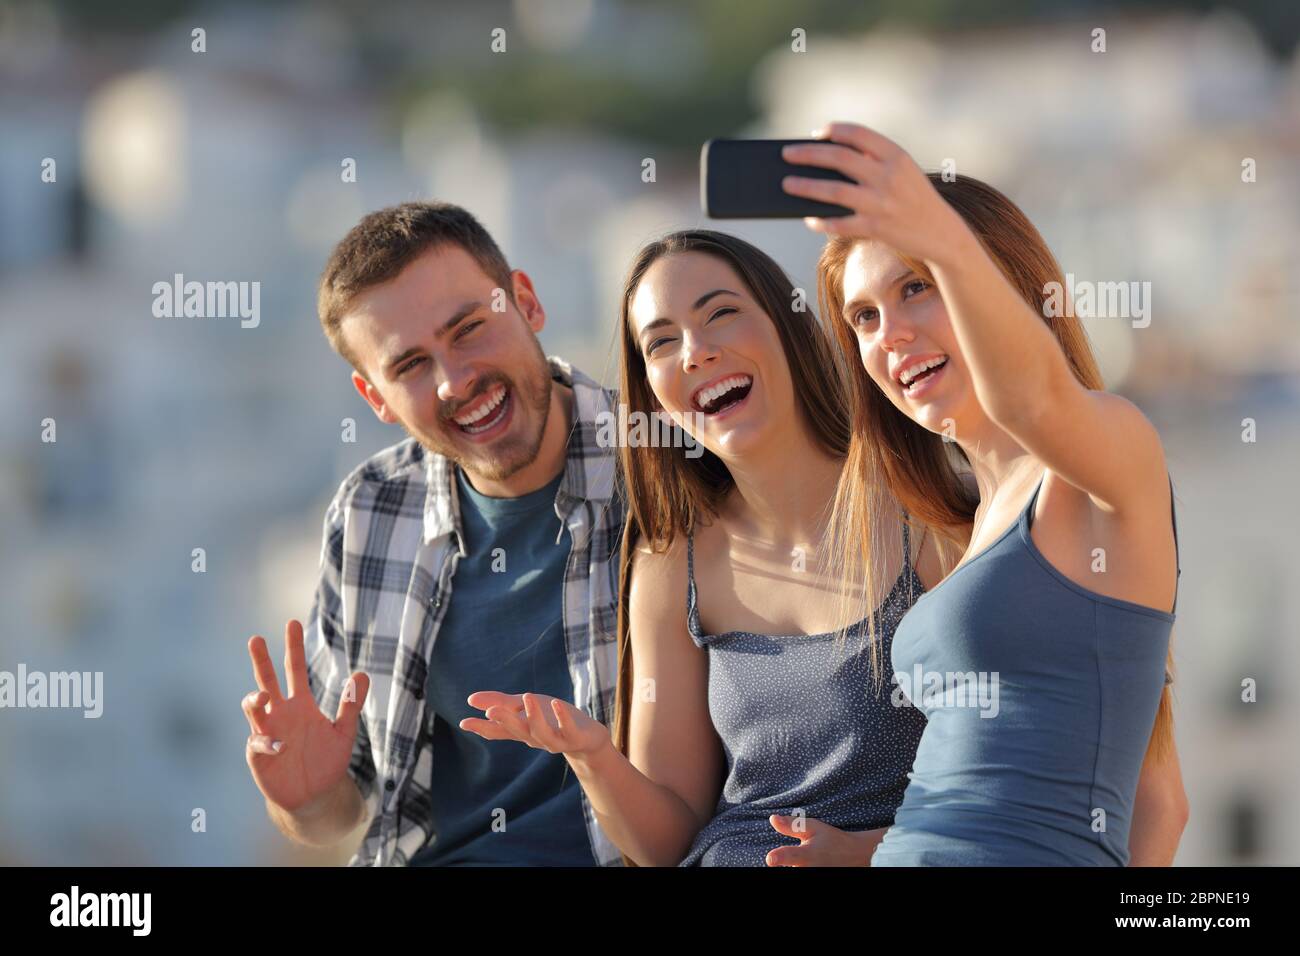 Three happy friends taking selfies with a smart phone outdoors in a town outskirts at sunset Stock Photo